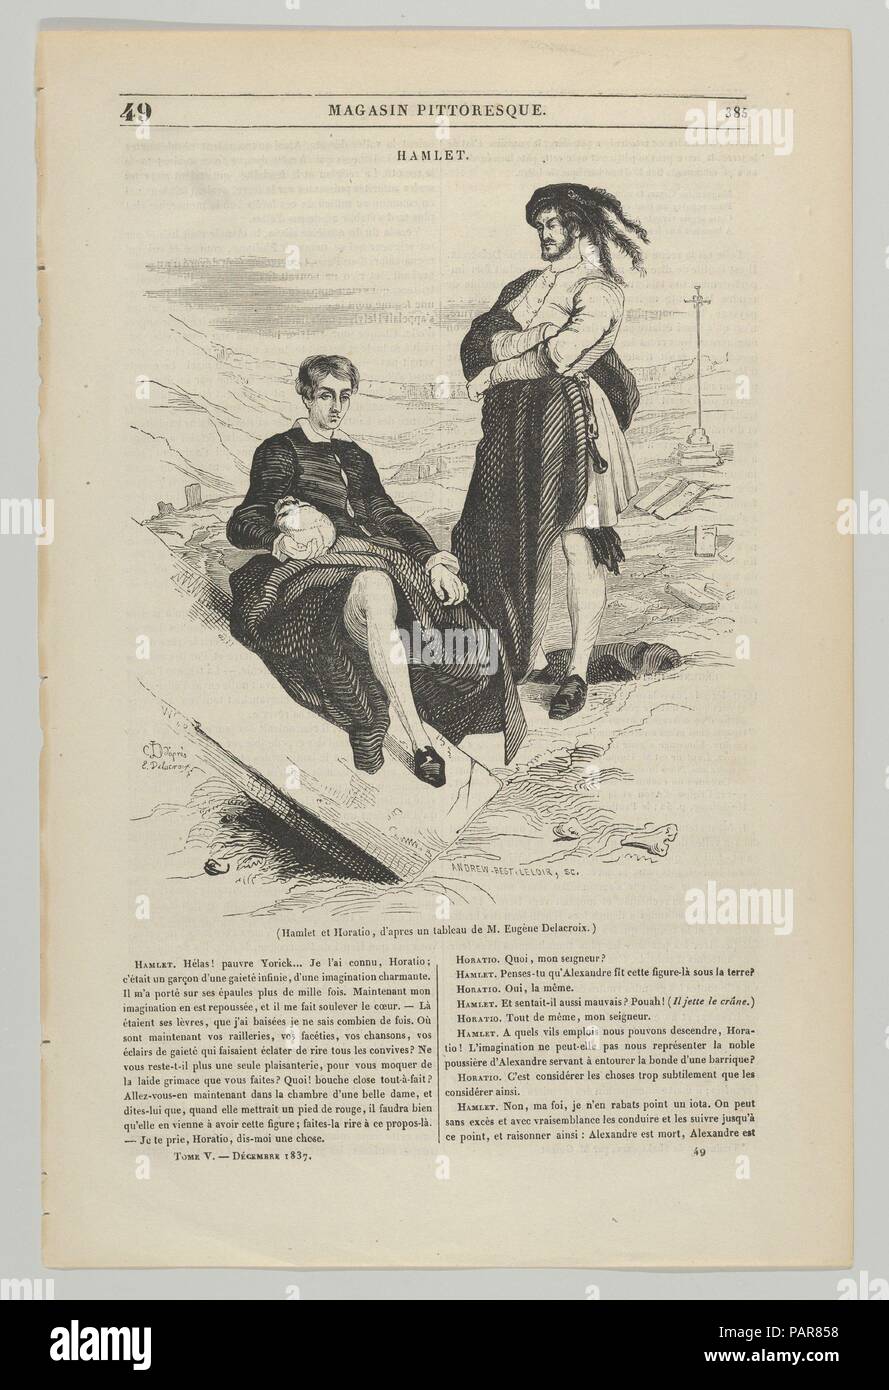 Wood engraving after painting by Delacroix of Hamlet and Horatio. Artist: After Eugène Delacroix (French, Charenton-Saint-Maurice 1798-1863 Paris). Dimensions: Image: 7 1/2 x 5 15/16 in. (19 x 15.1 cm)  Sheet: 11 11/16 x 7 11/16 in. (29.7 x 19.5 cm). Engraver: Andrew, Best, Leloir (French). Subject: William Shakespeare (British, Stratford-upon-Avon 1564-1616 Stratford-upon-Avon). Date: December 1837. Museum: Metropolitan Museum of Art, New York, USA. Stock Photo